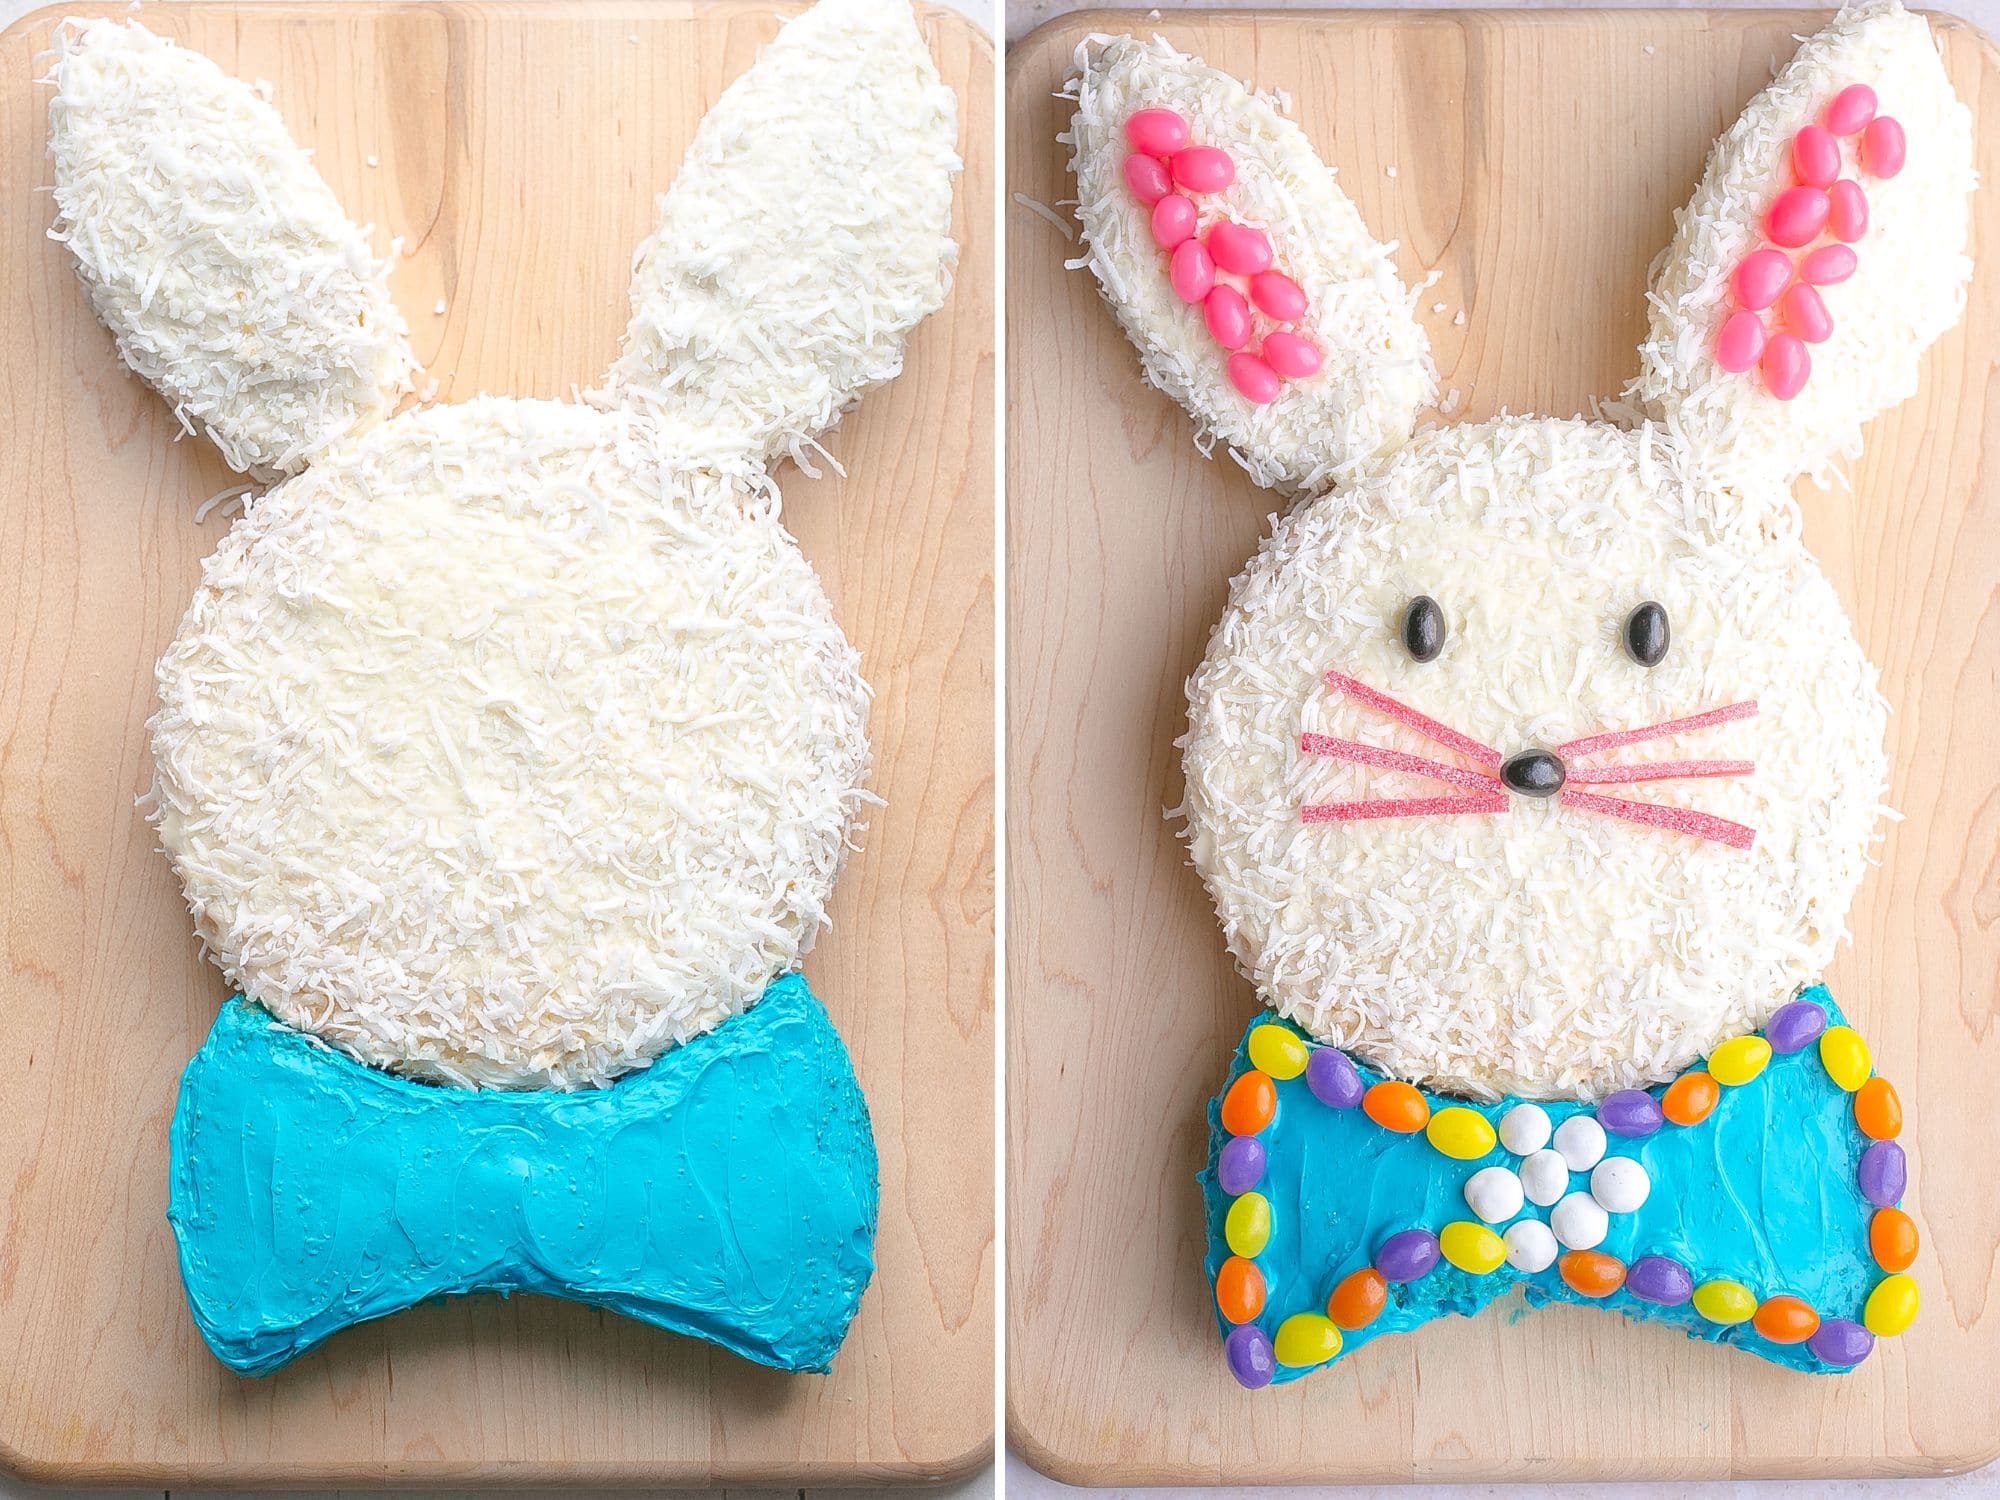 How to make an Easter bunny cake.